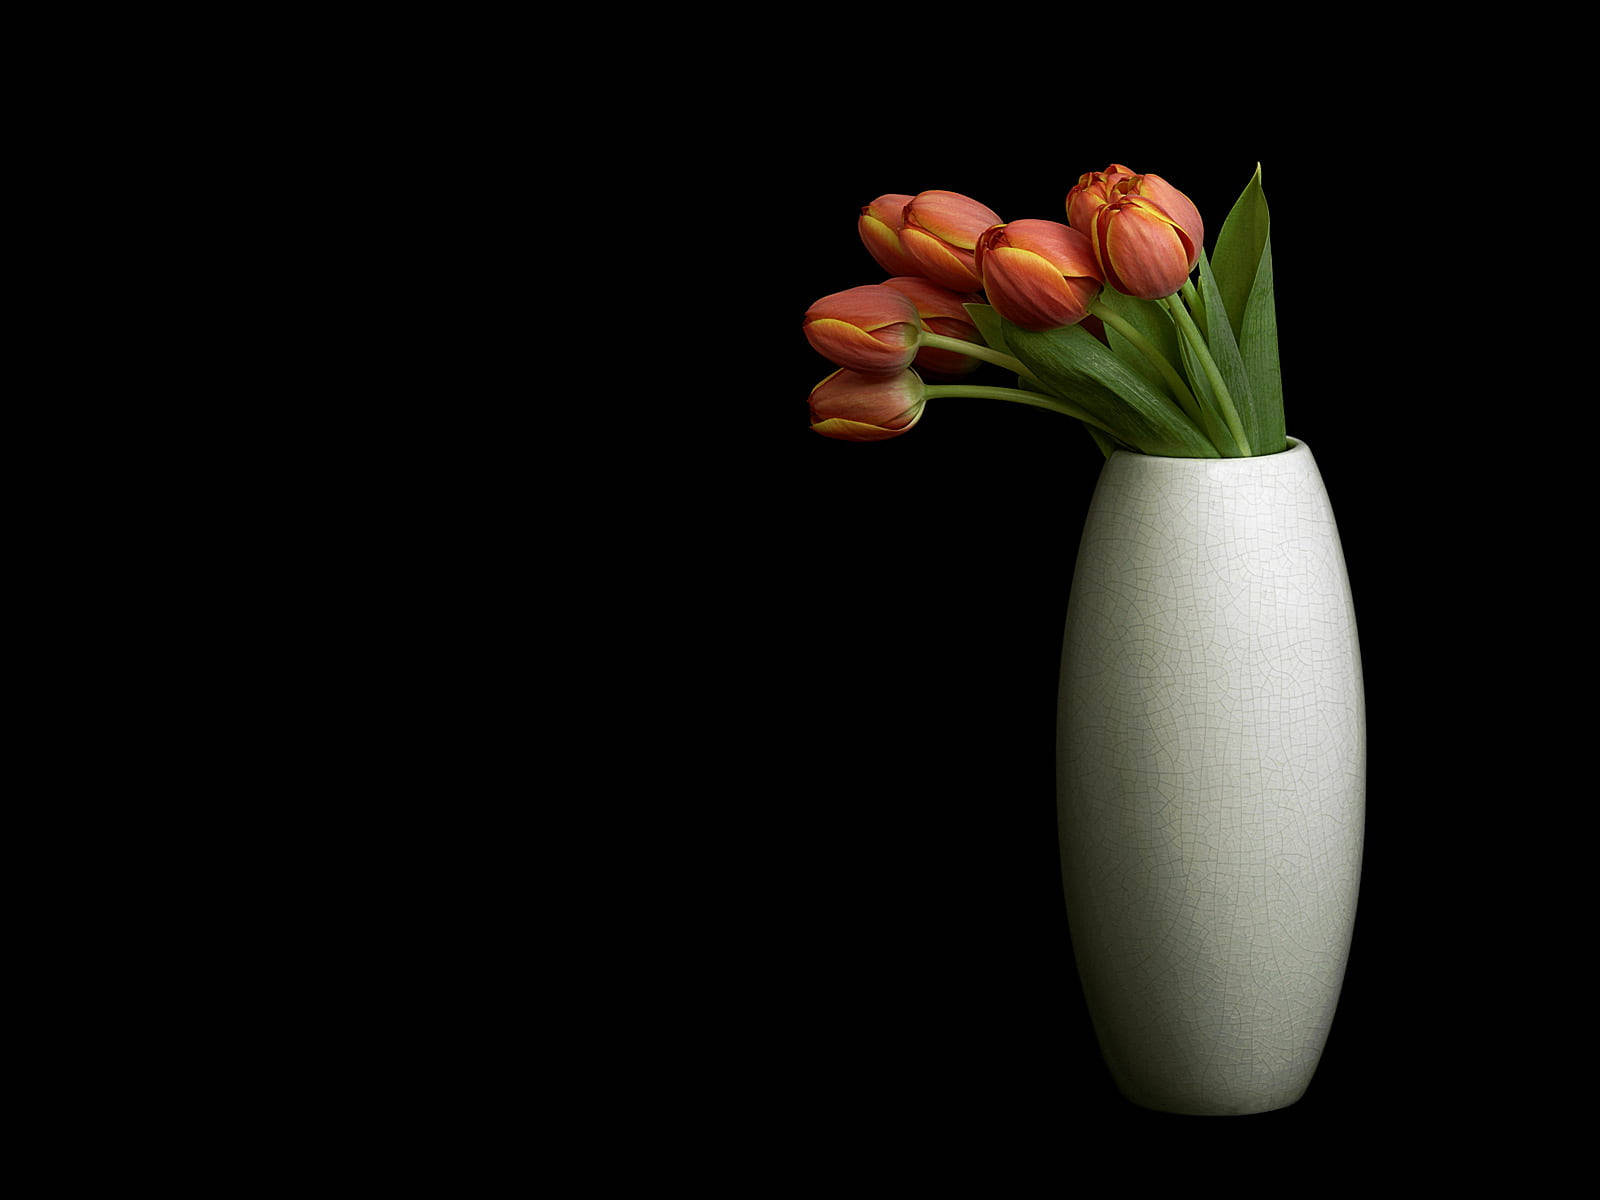 Background Black With Vased Tulips Wallpaper